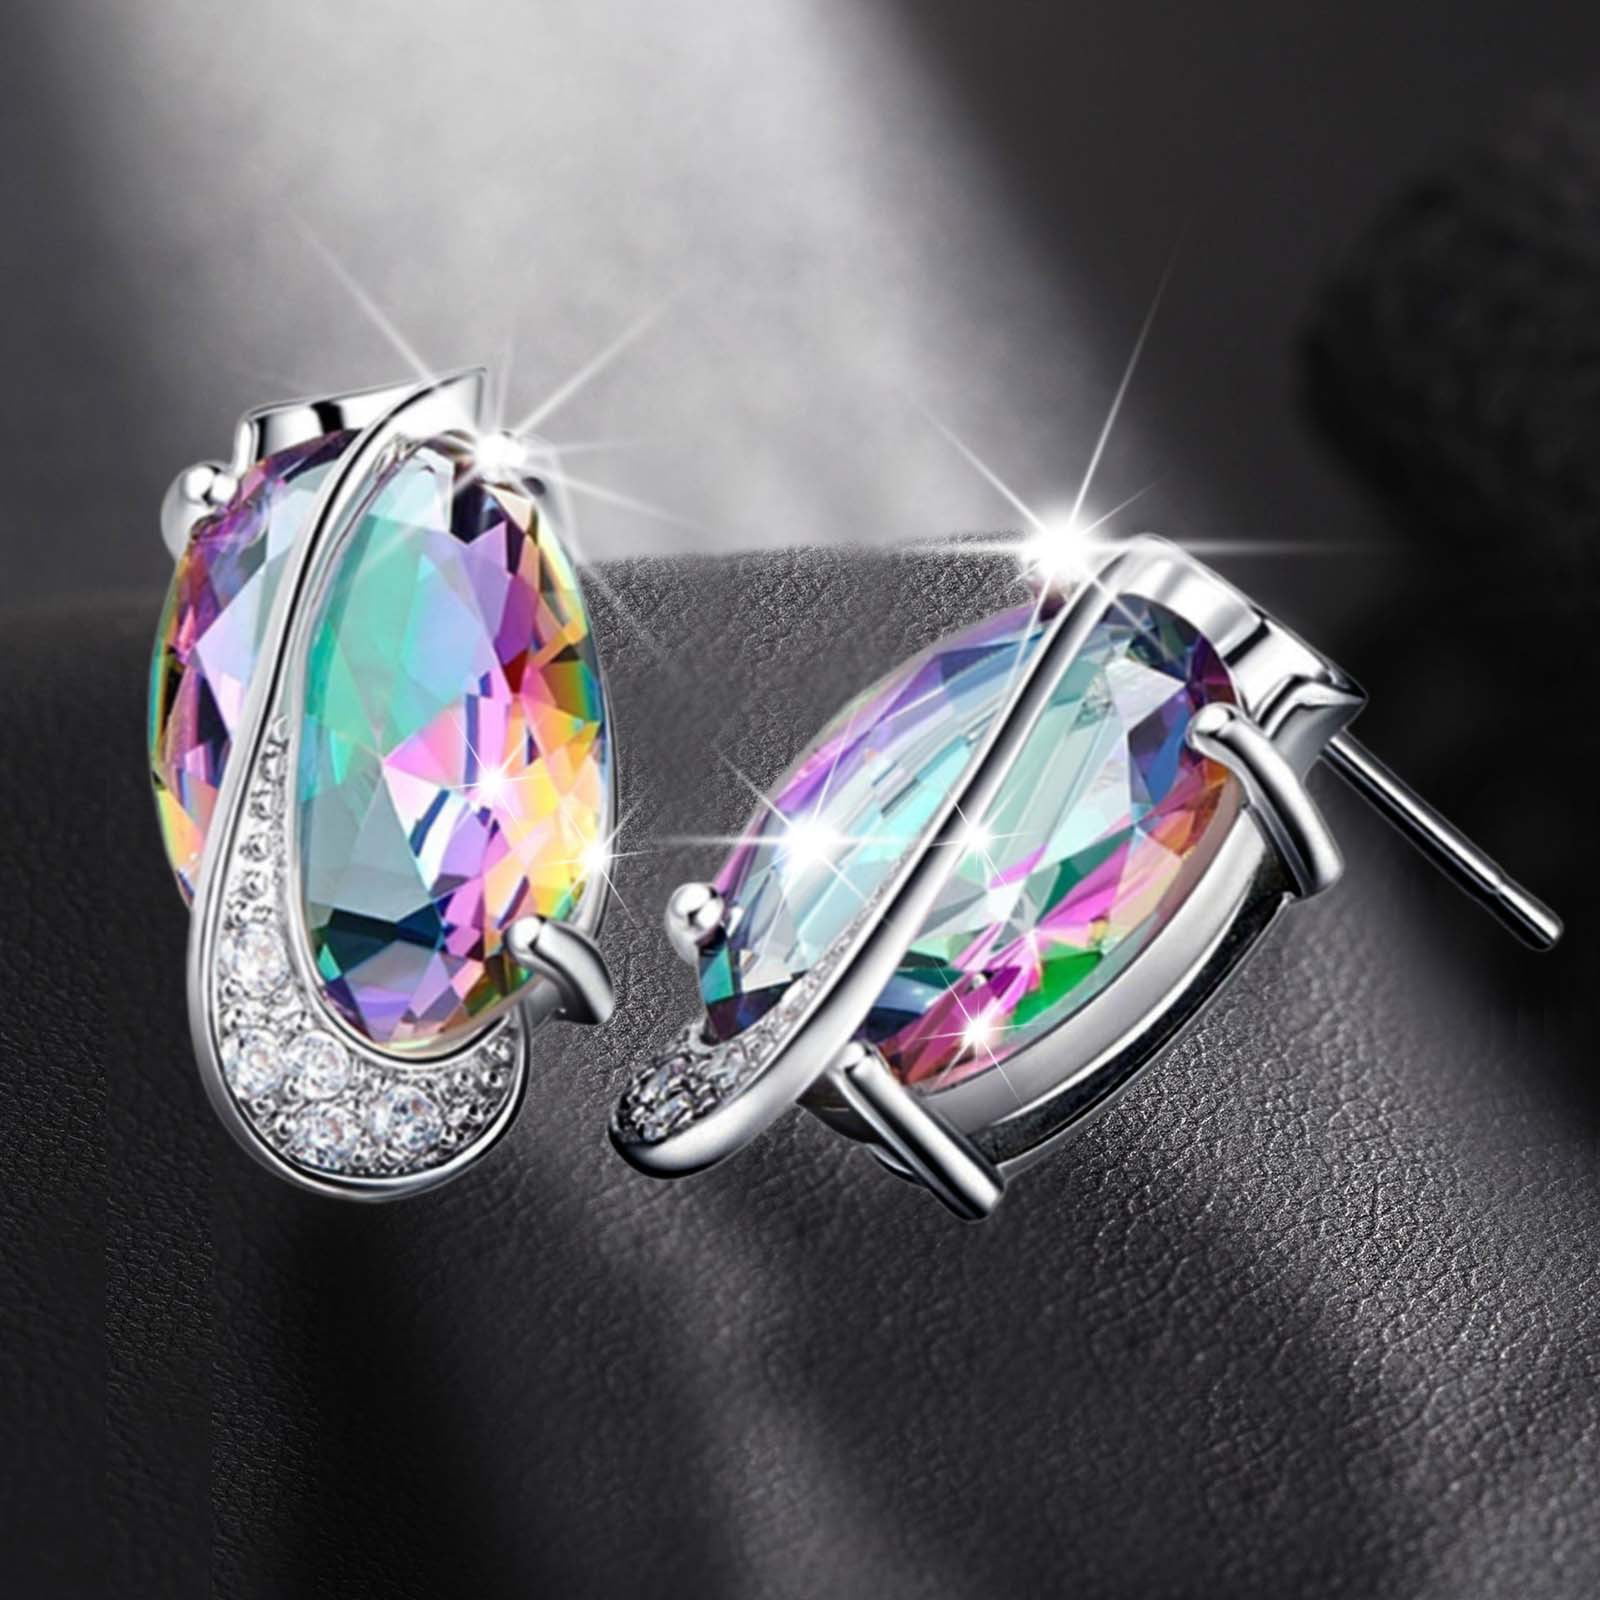 Rainbow Stud Earrings with Sapphires, Diamonds and Mother of Pearl